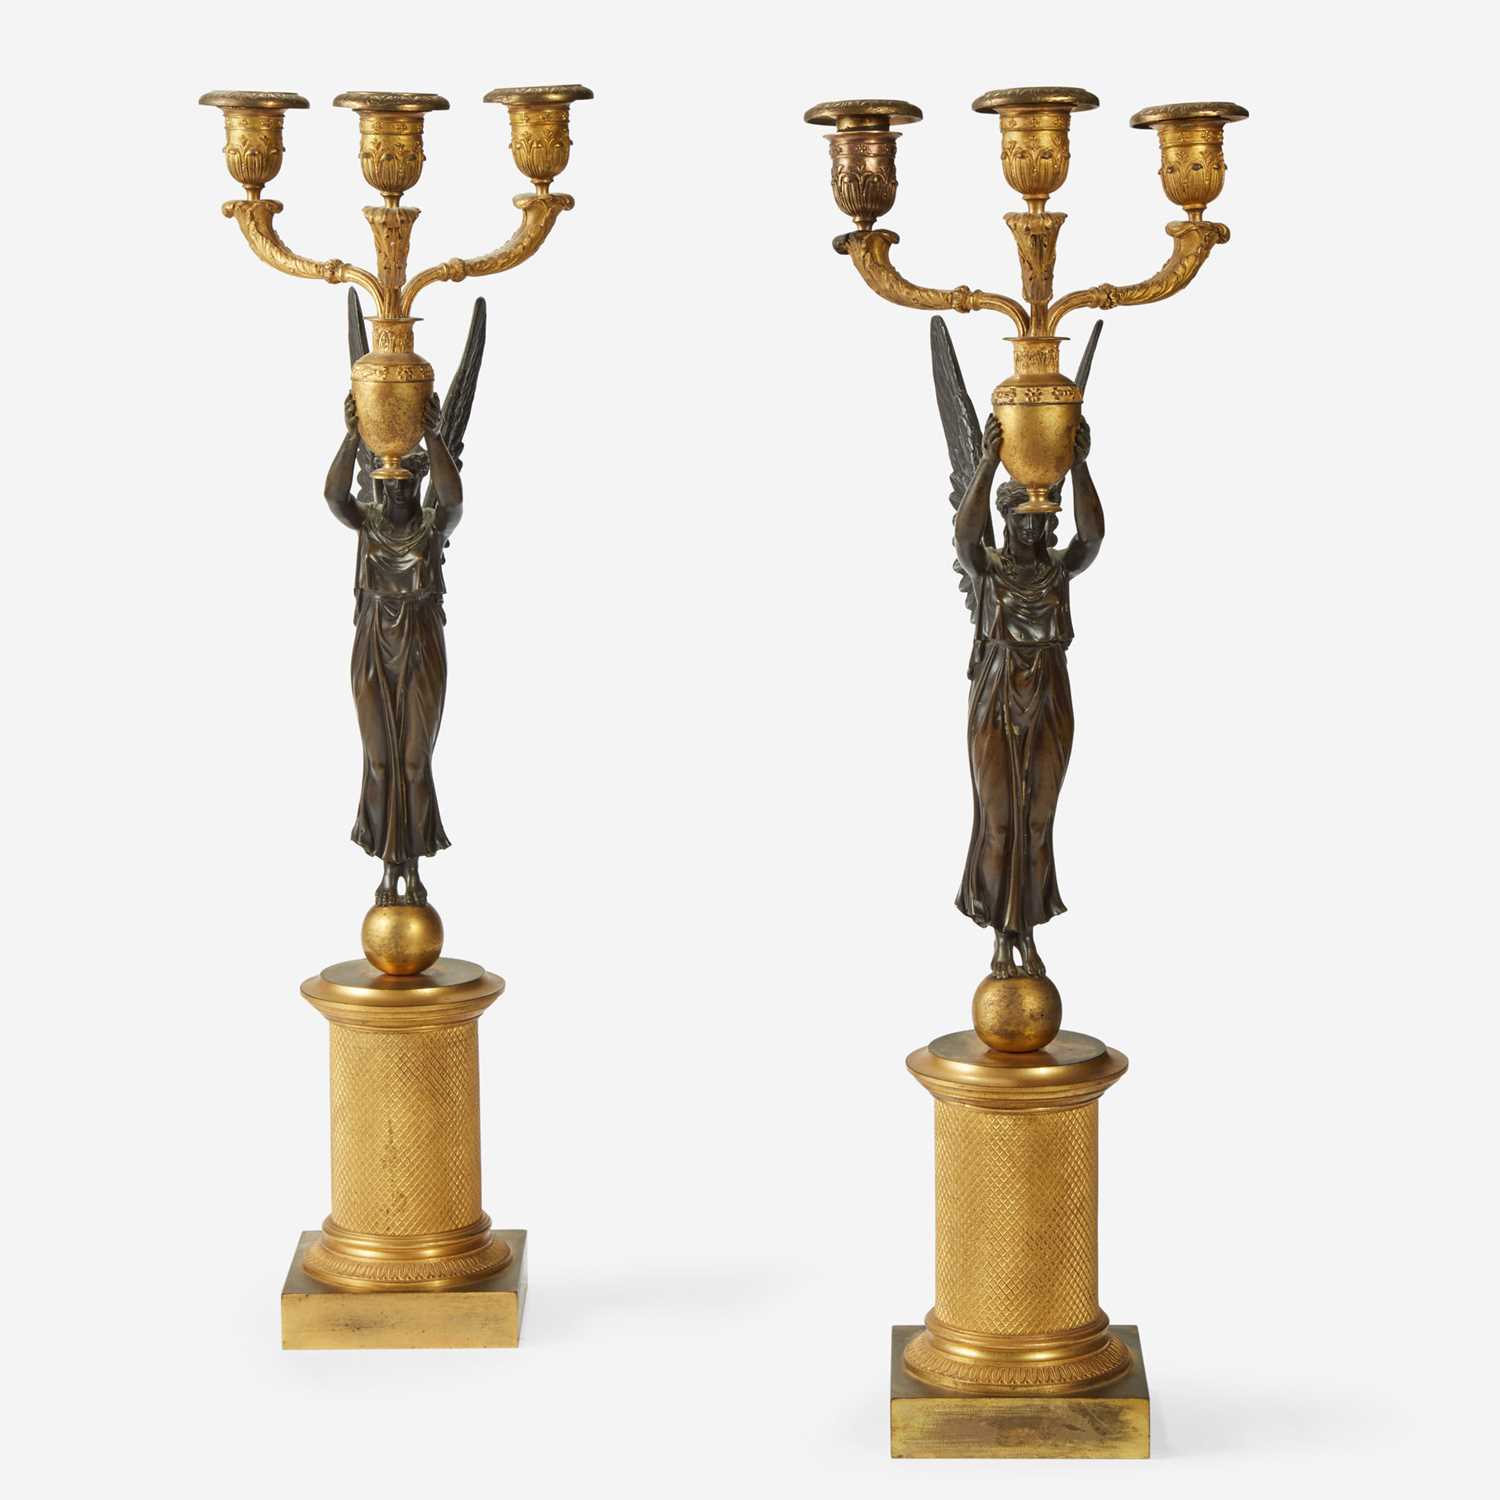 Lot 40 - A Pair of Empire Gilt and Patinated Bronze Figural Three-Light Candelabra